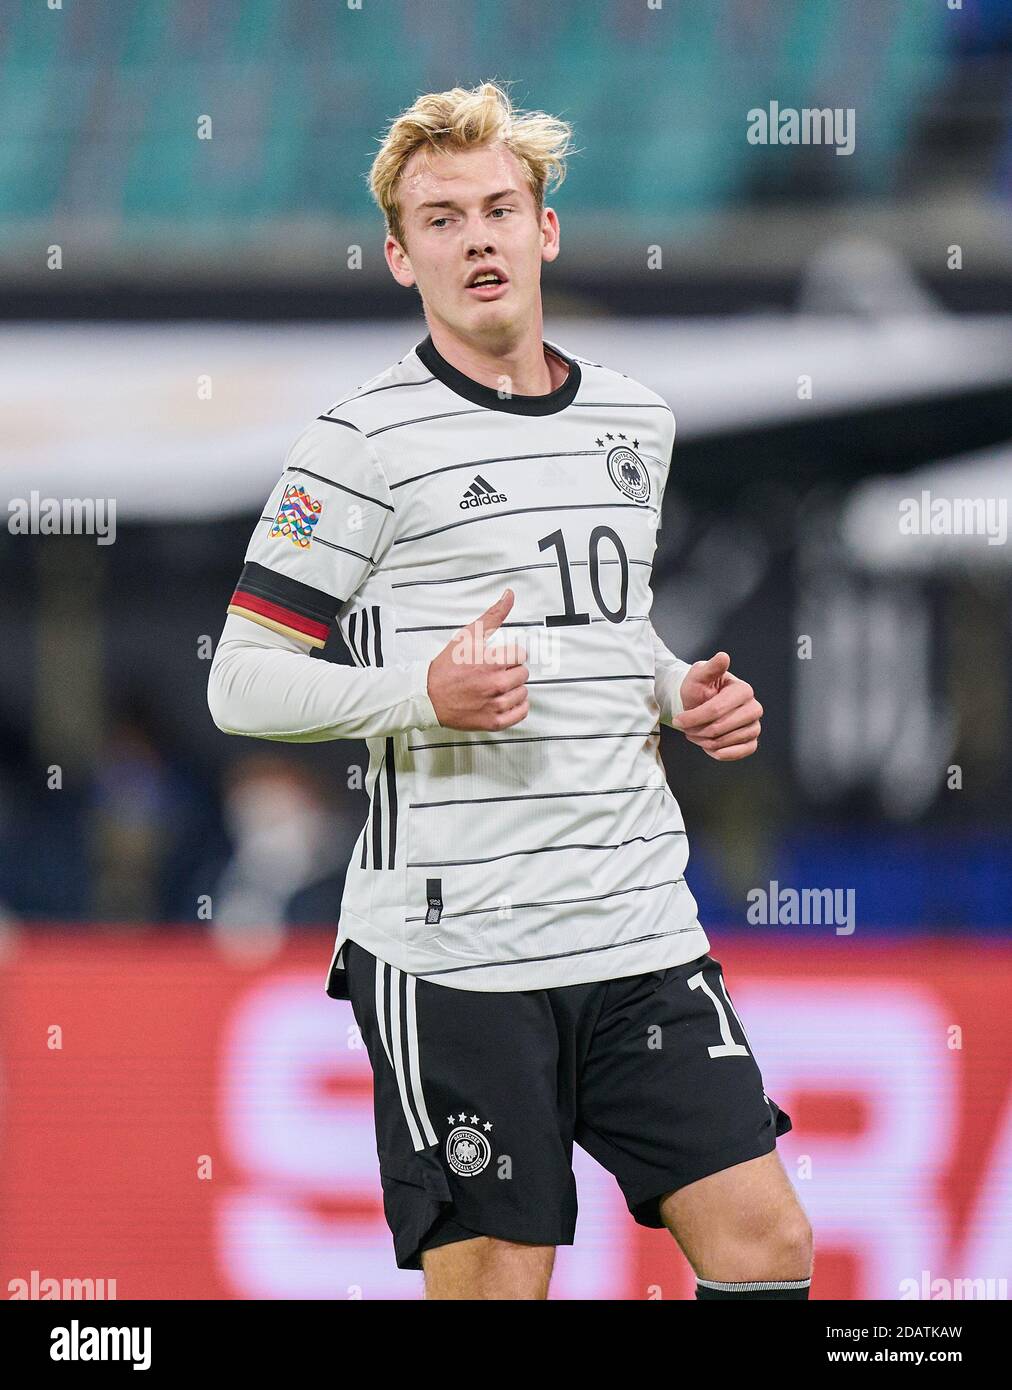 Julian BRANDT, DFB 10  half-size, portrait, one person, single, Aktion, Einzelbild, angeschnittenes Einzelmotiv, Halbfigur, halbe Figur,  in the match GERMANY - UKRAINE 3-1 UEFA Nations League,  German Football Nationalteam, DFB , Season 2020/2021 in Leipzig, Germany, November 14, 2020 © Peter Schatz / Alamy Live News   Important: DFB regulations prohibit any use of photographs as image sequences and/or quasi-video. Stock Photo